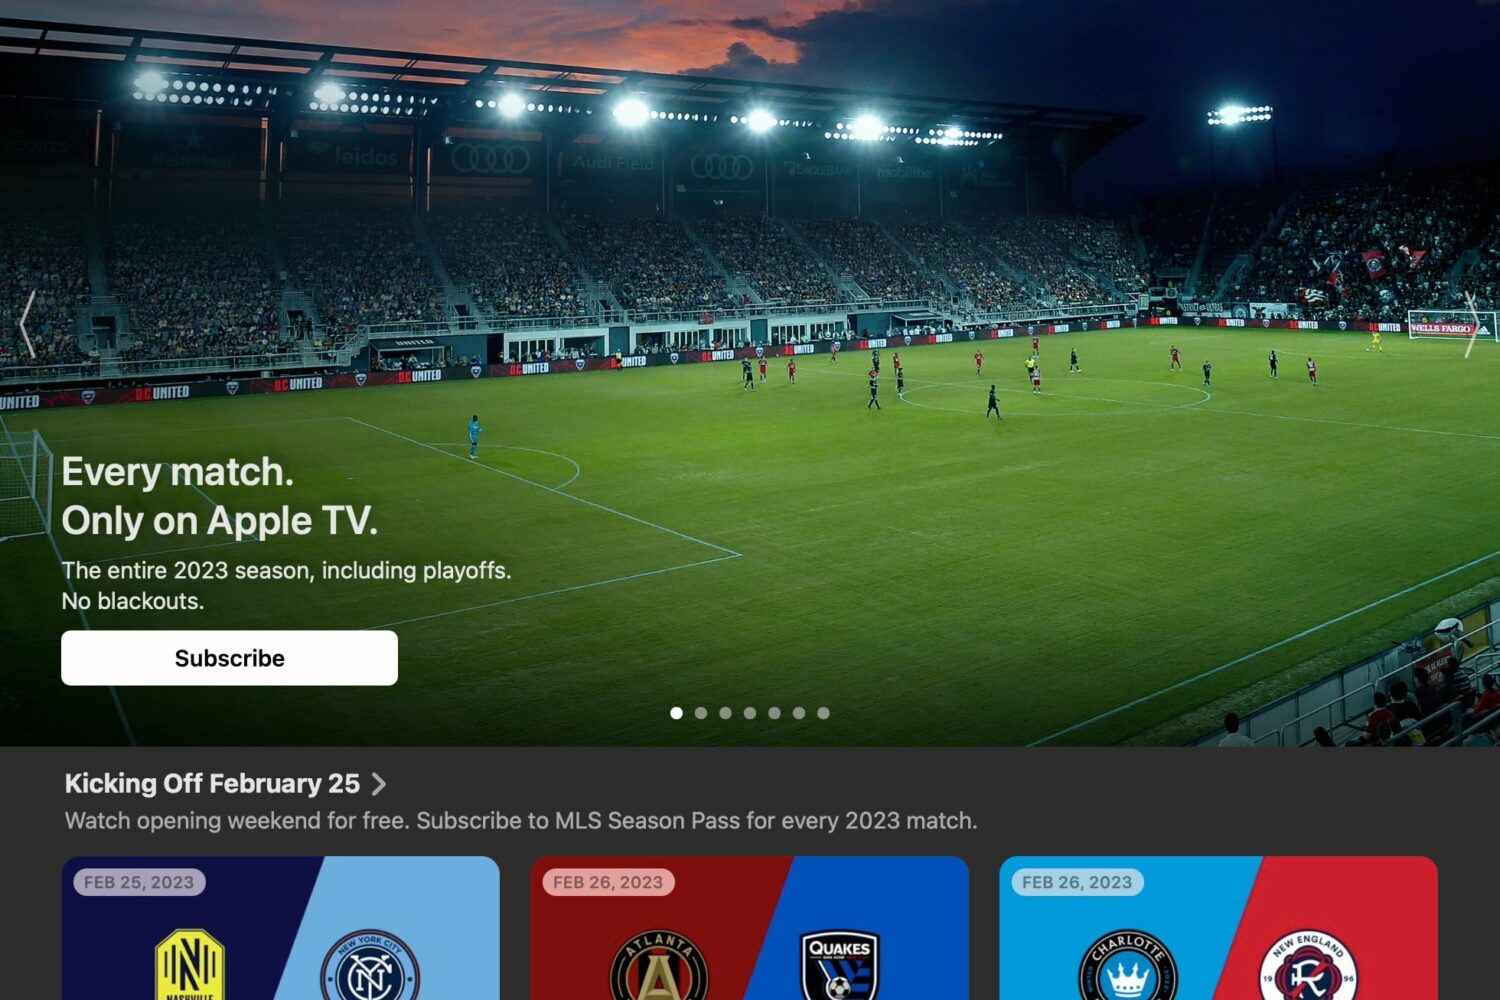 The MLS section in the Apple TV app